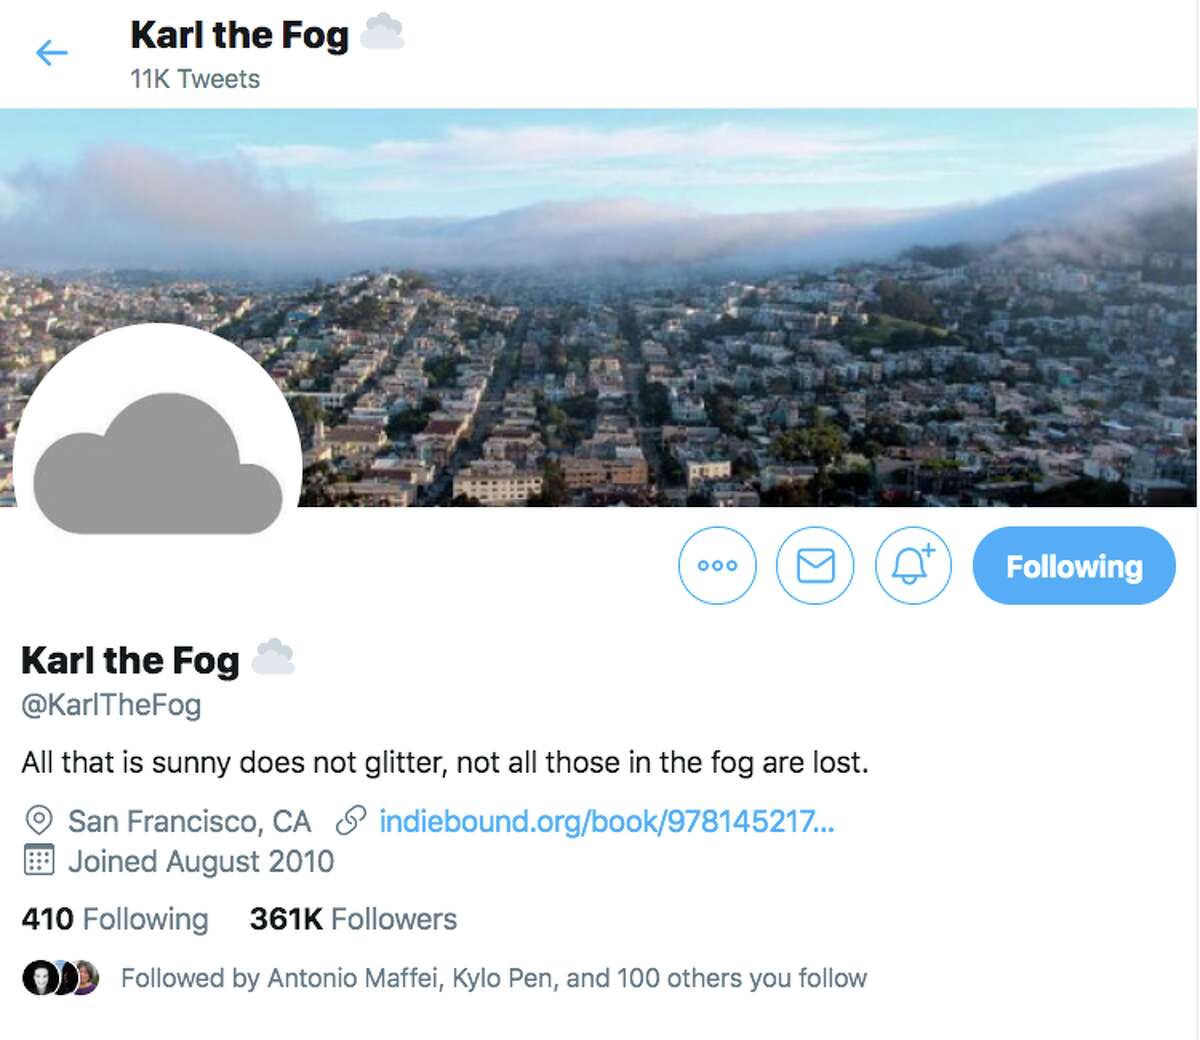 The wildly popular Twitter account @KarletheFog has more than 361,000 followers. The account was first launched in 2010 and the person behind it has kept his identity under wraps.